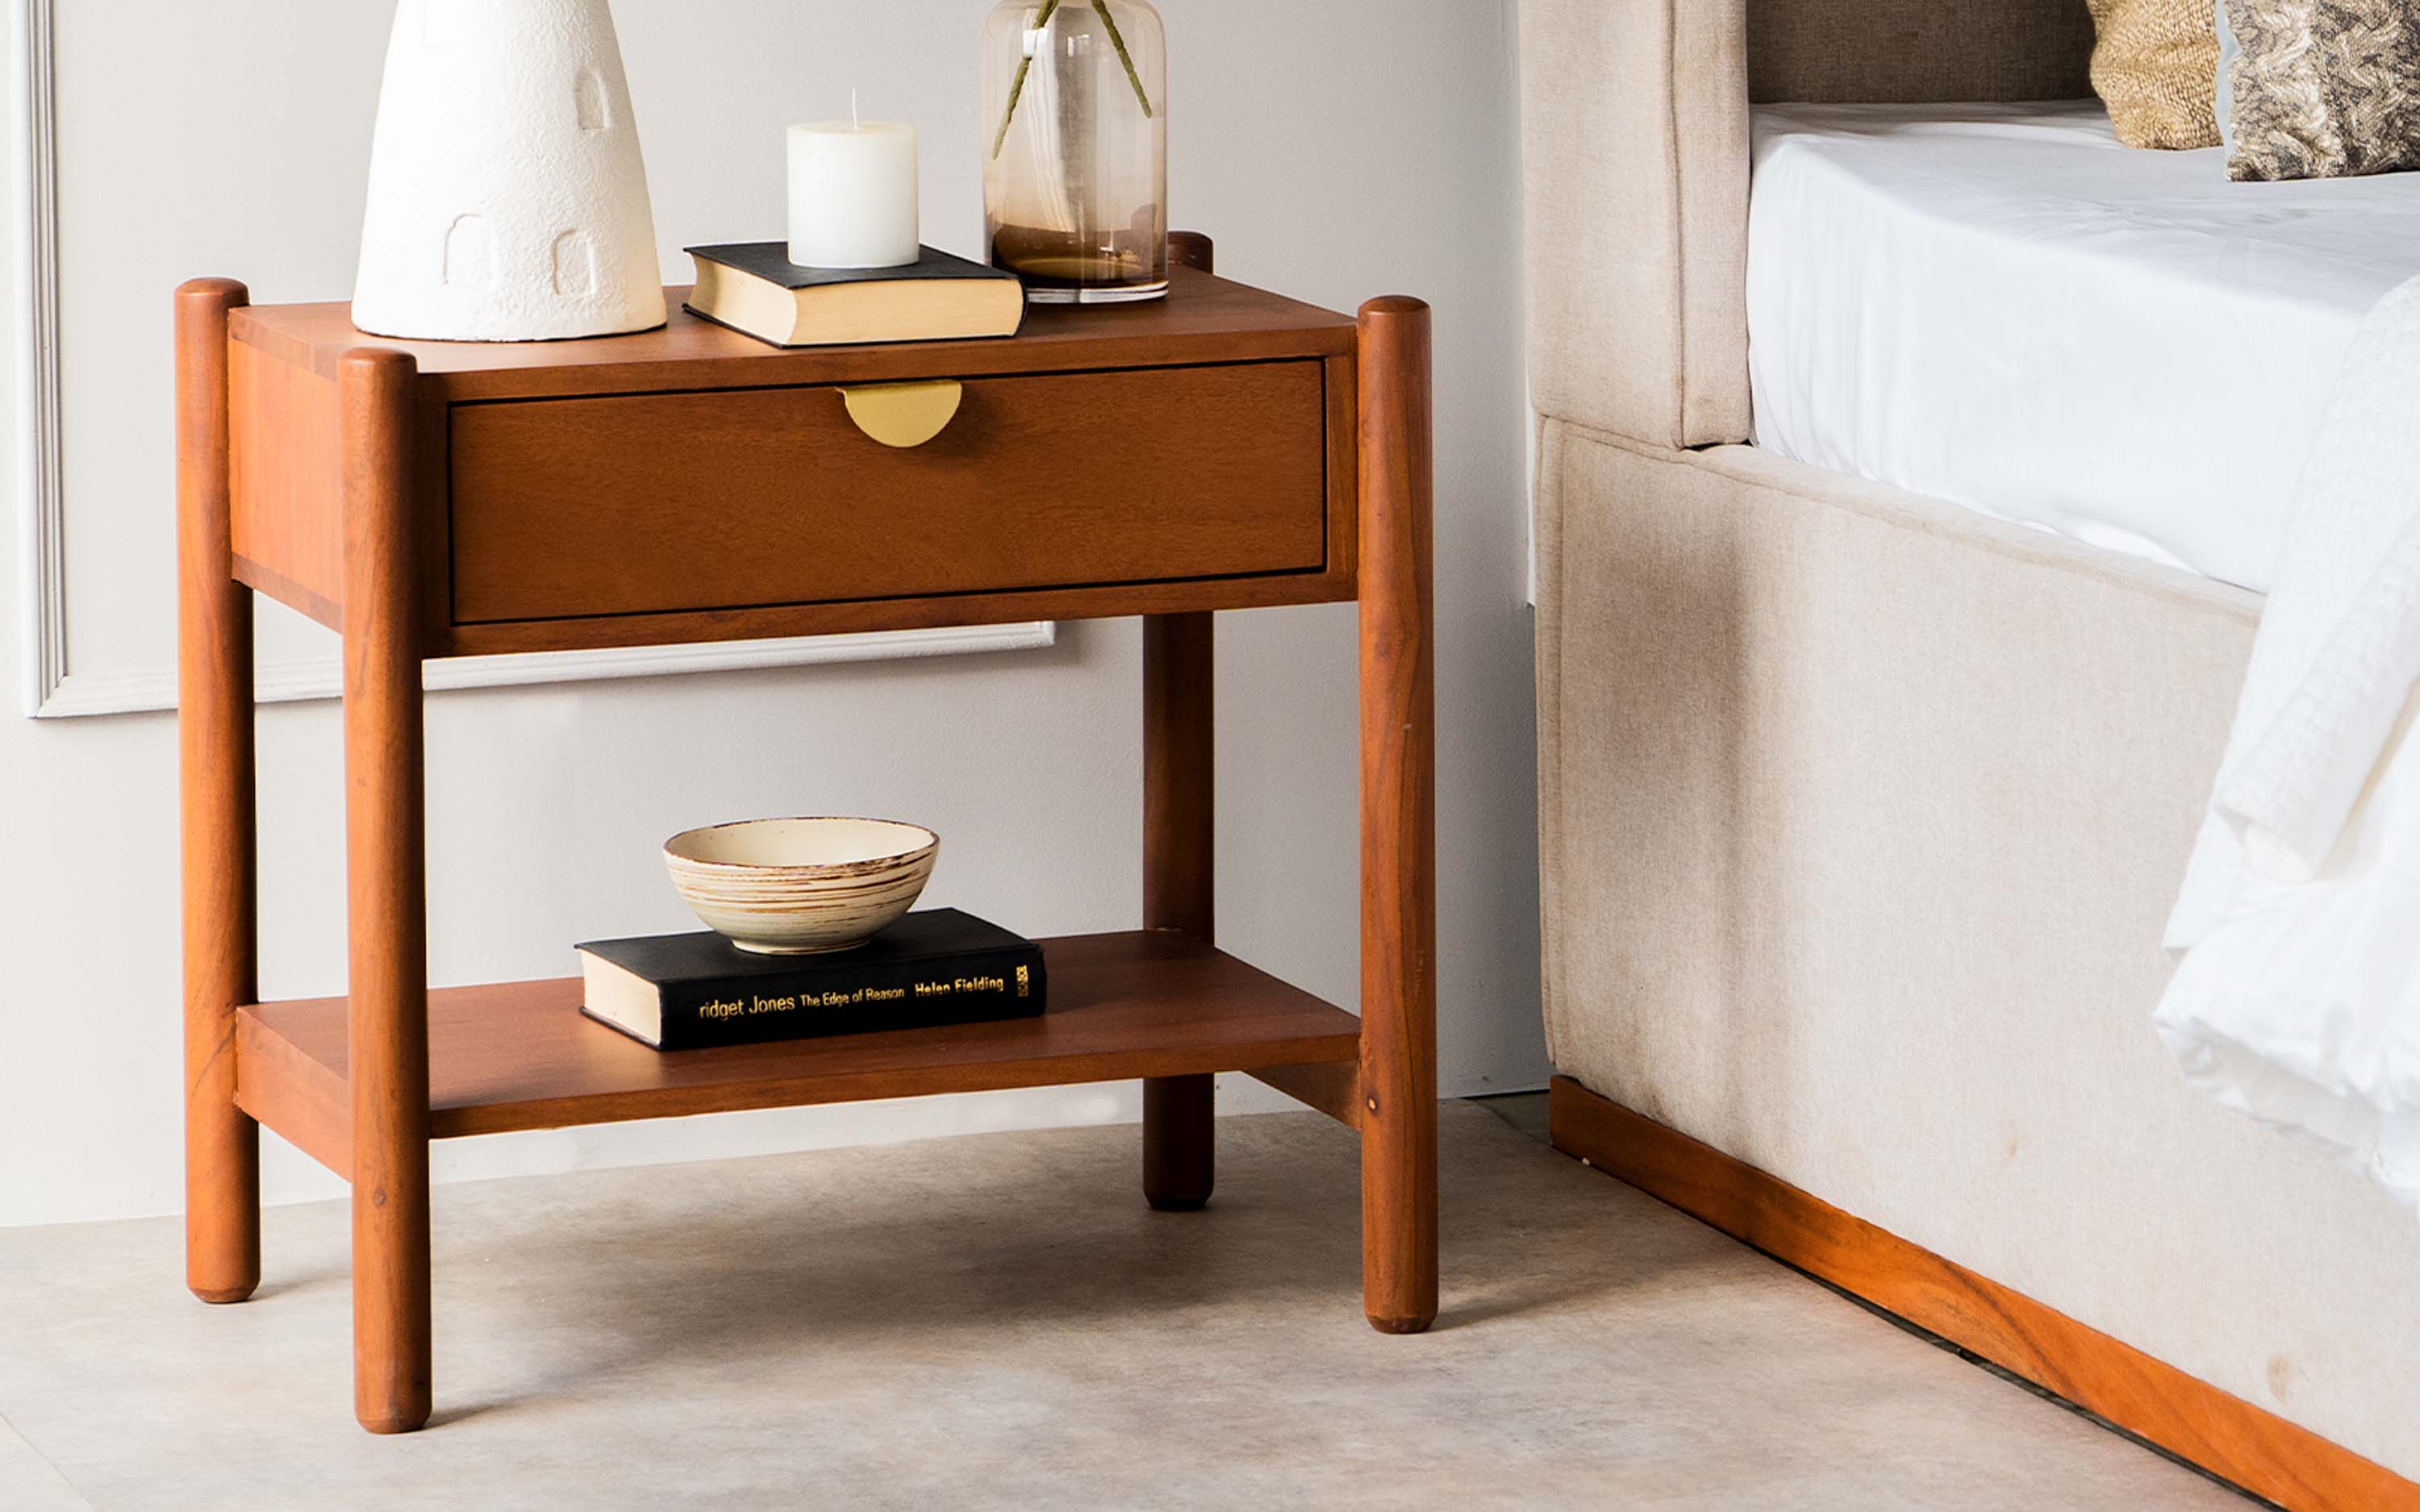 Sleek wooden bedside table with stylish decor in a contemporary luxury bedroom